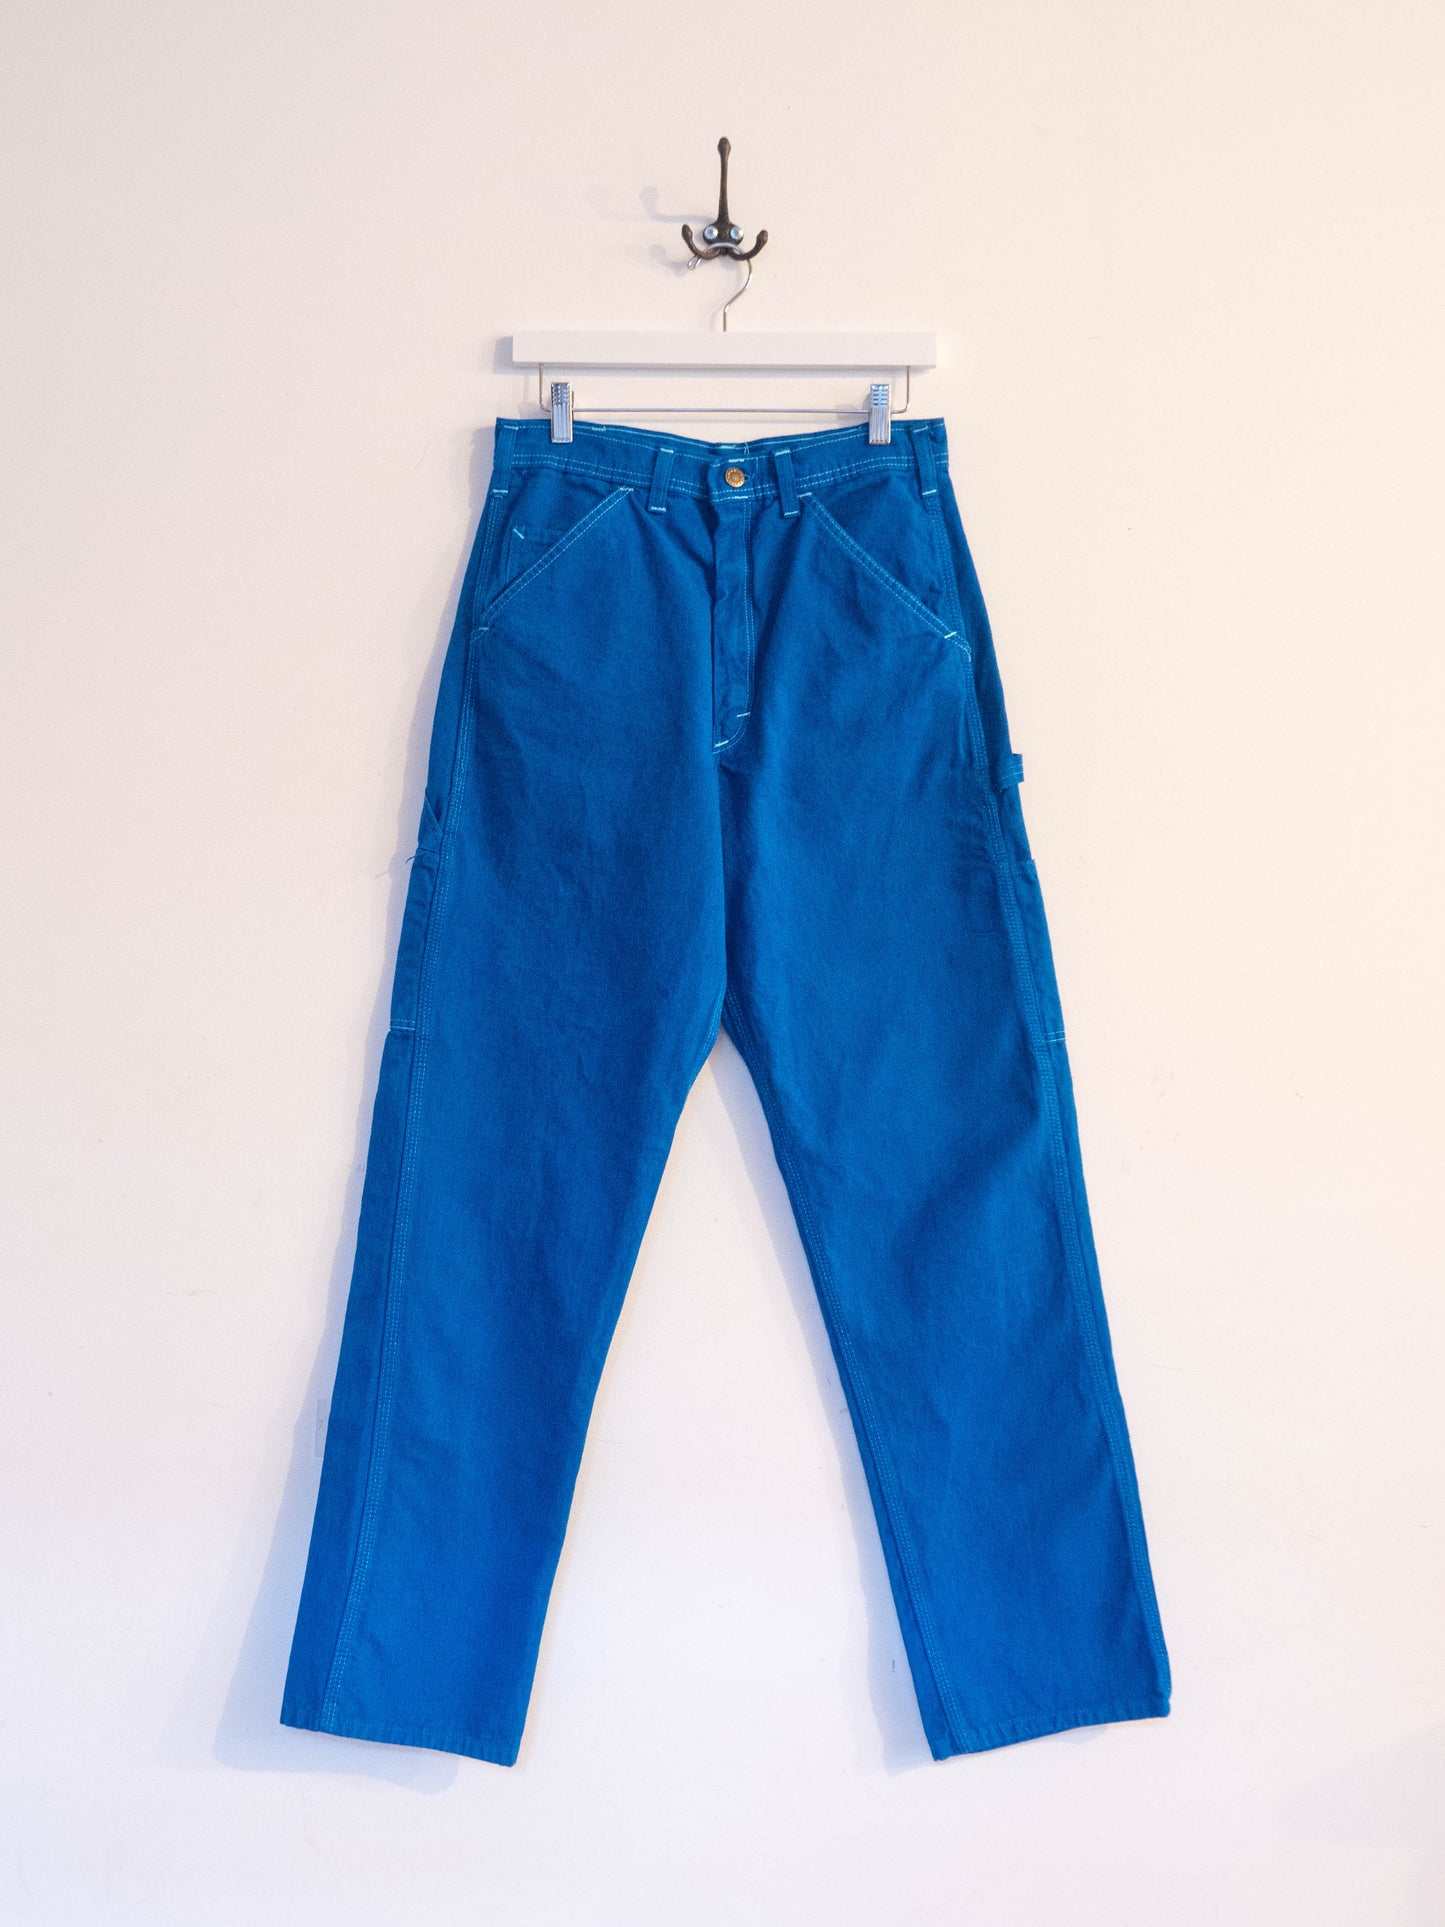 Tropical Blue - Stan Ray Painter Pants